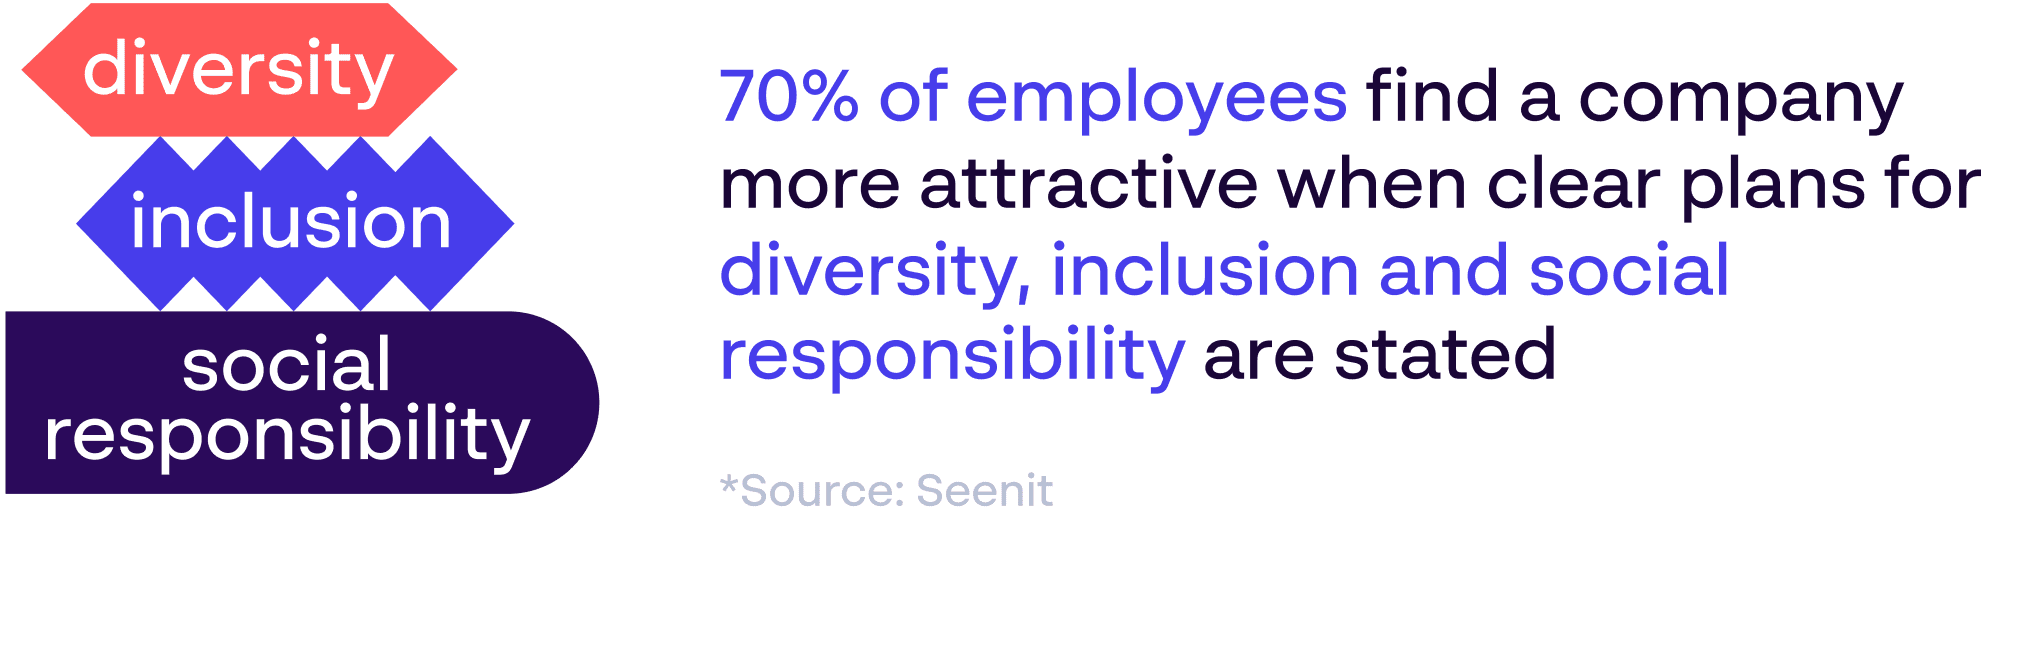 70% of employees find a company more attractive when clear plans for diversity, inclusion and social responsibility are stated